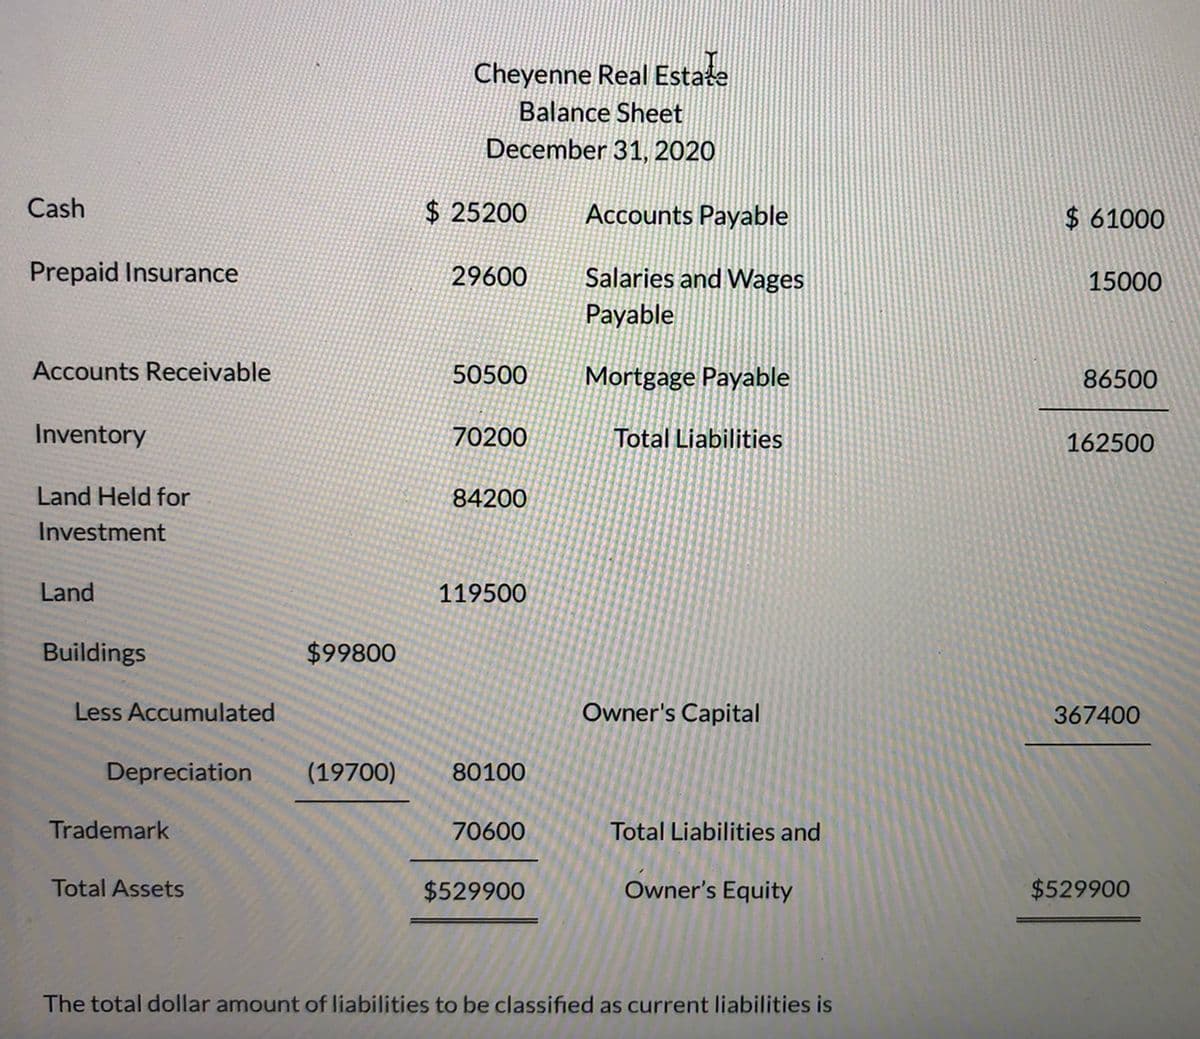 Cheyenne Real Estate
Balance Sheet
December 31, 2020
Cash
$ 25200
Accounts Payable
$ 61000
Prepaid Insurance
29600
Salaries and Wages
15000
Payable
Accounts Receivable
50500
Mortgage Payable
86500
Inventory
70200
Total Liabilities
162500
Land Held for
84200
Investment
Land
119500
Buildings
$99800
Less Accumulated
Owner's Capital
367400
Depreciation
(19700)
80100
Trademark
70600
Total Liabilities and
Total Assets
$529900
Owner's Equity
$529900
The total dollar amount of liabilities to be classified as current liabilities is
